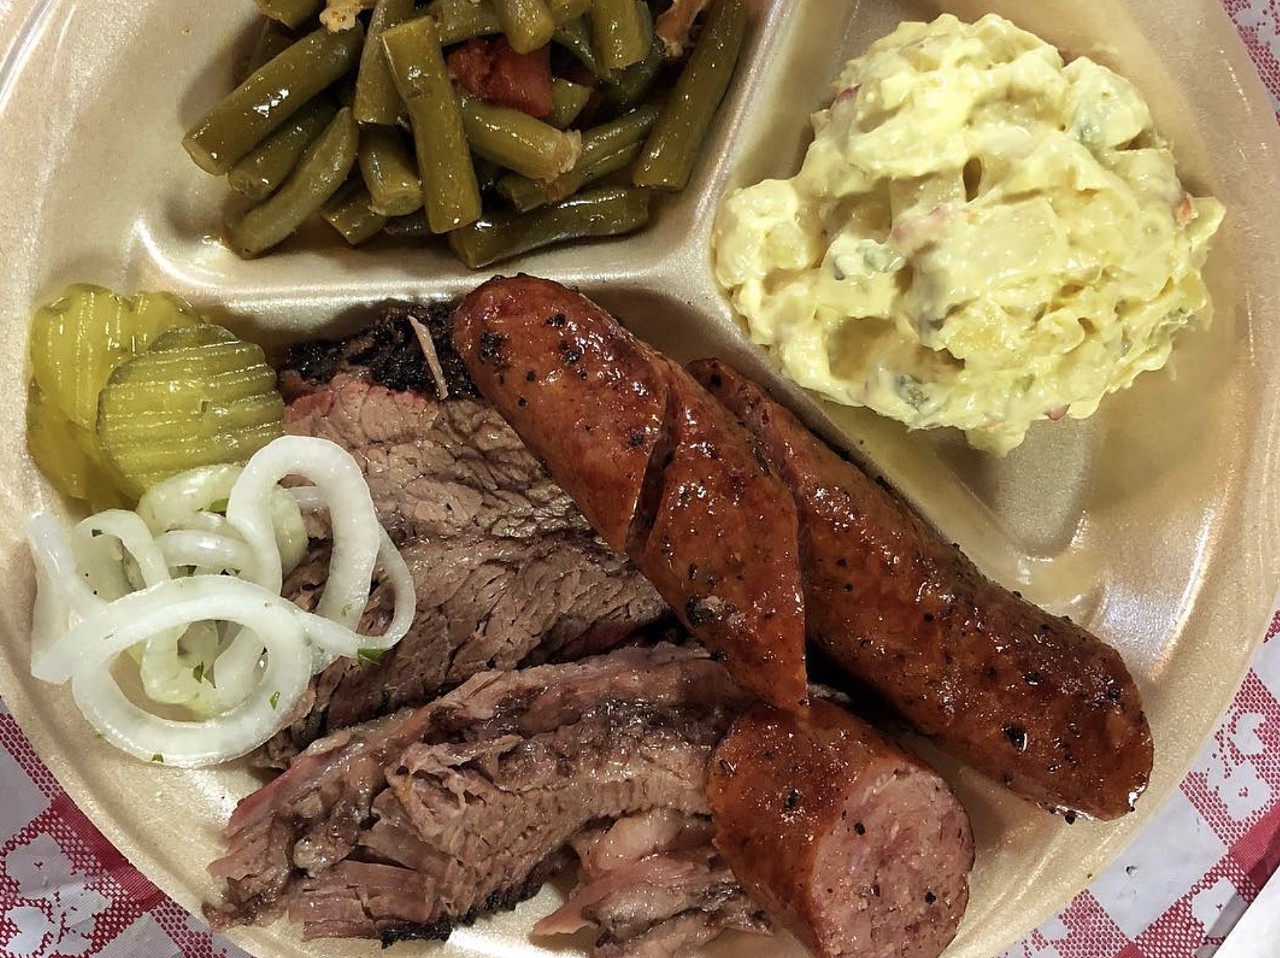 You can raise enough money for any relative's life-saving operation with a barbecue plate sale.